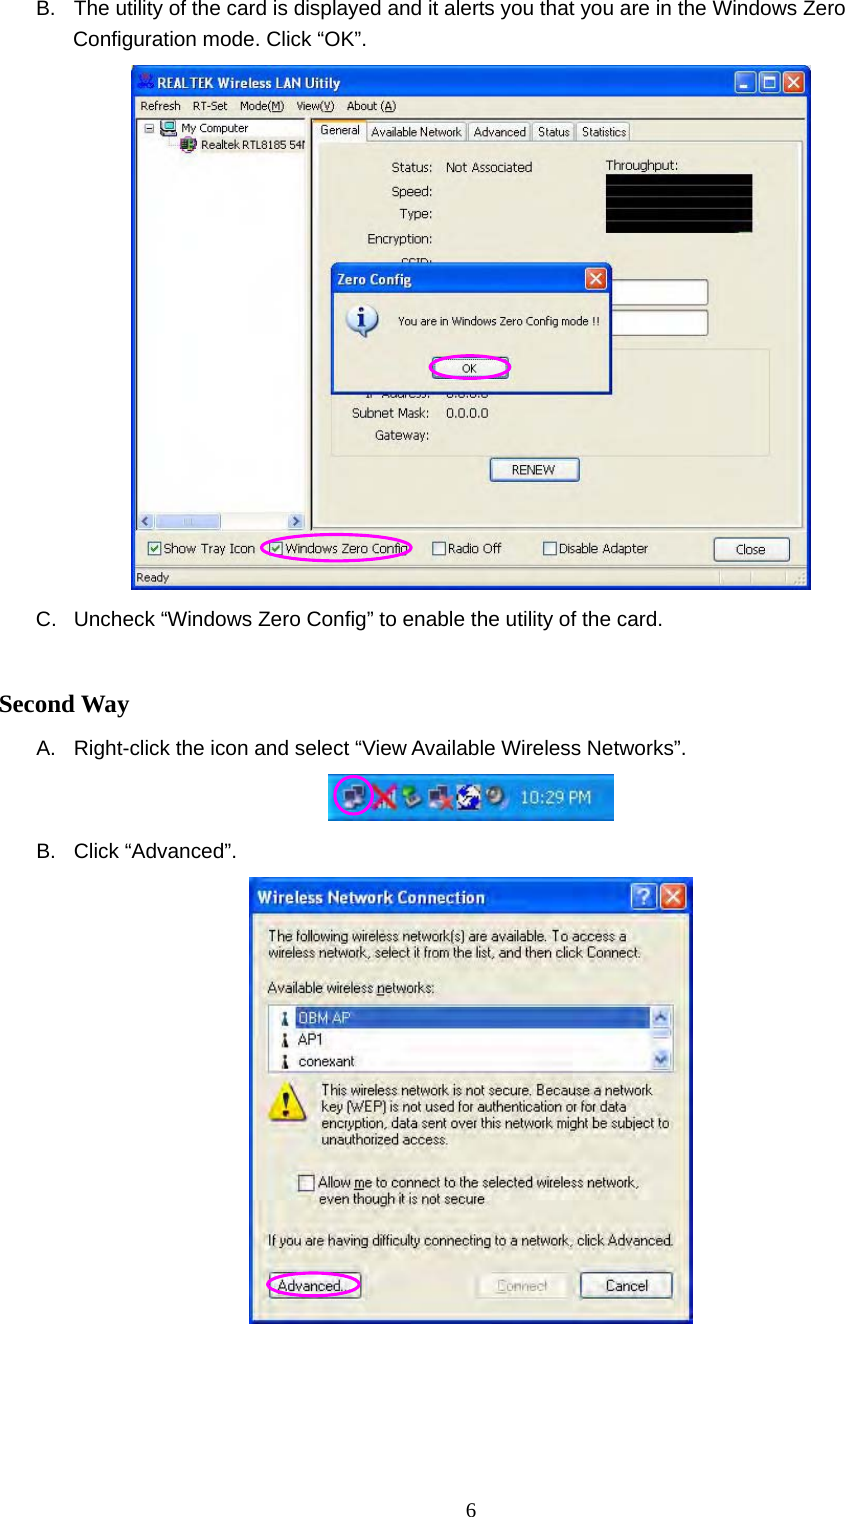  6 B.  The utility of the card is displayed and it alerts you that you are in the Windows Zero Configuration mode. Click “OK”.  C. Uncheck “Windows Zero Config” to enable the utility of the card.  Second Way A.  Right-click the icon and select “View Available Wireless Networks”.  B. Click “Advanced”.      